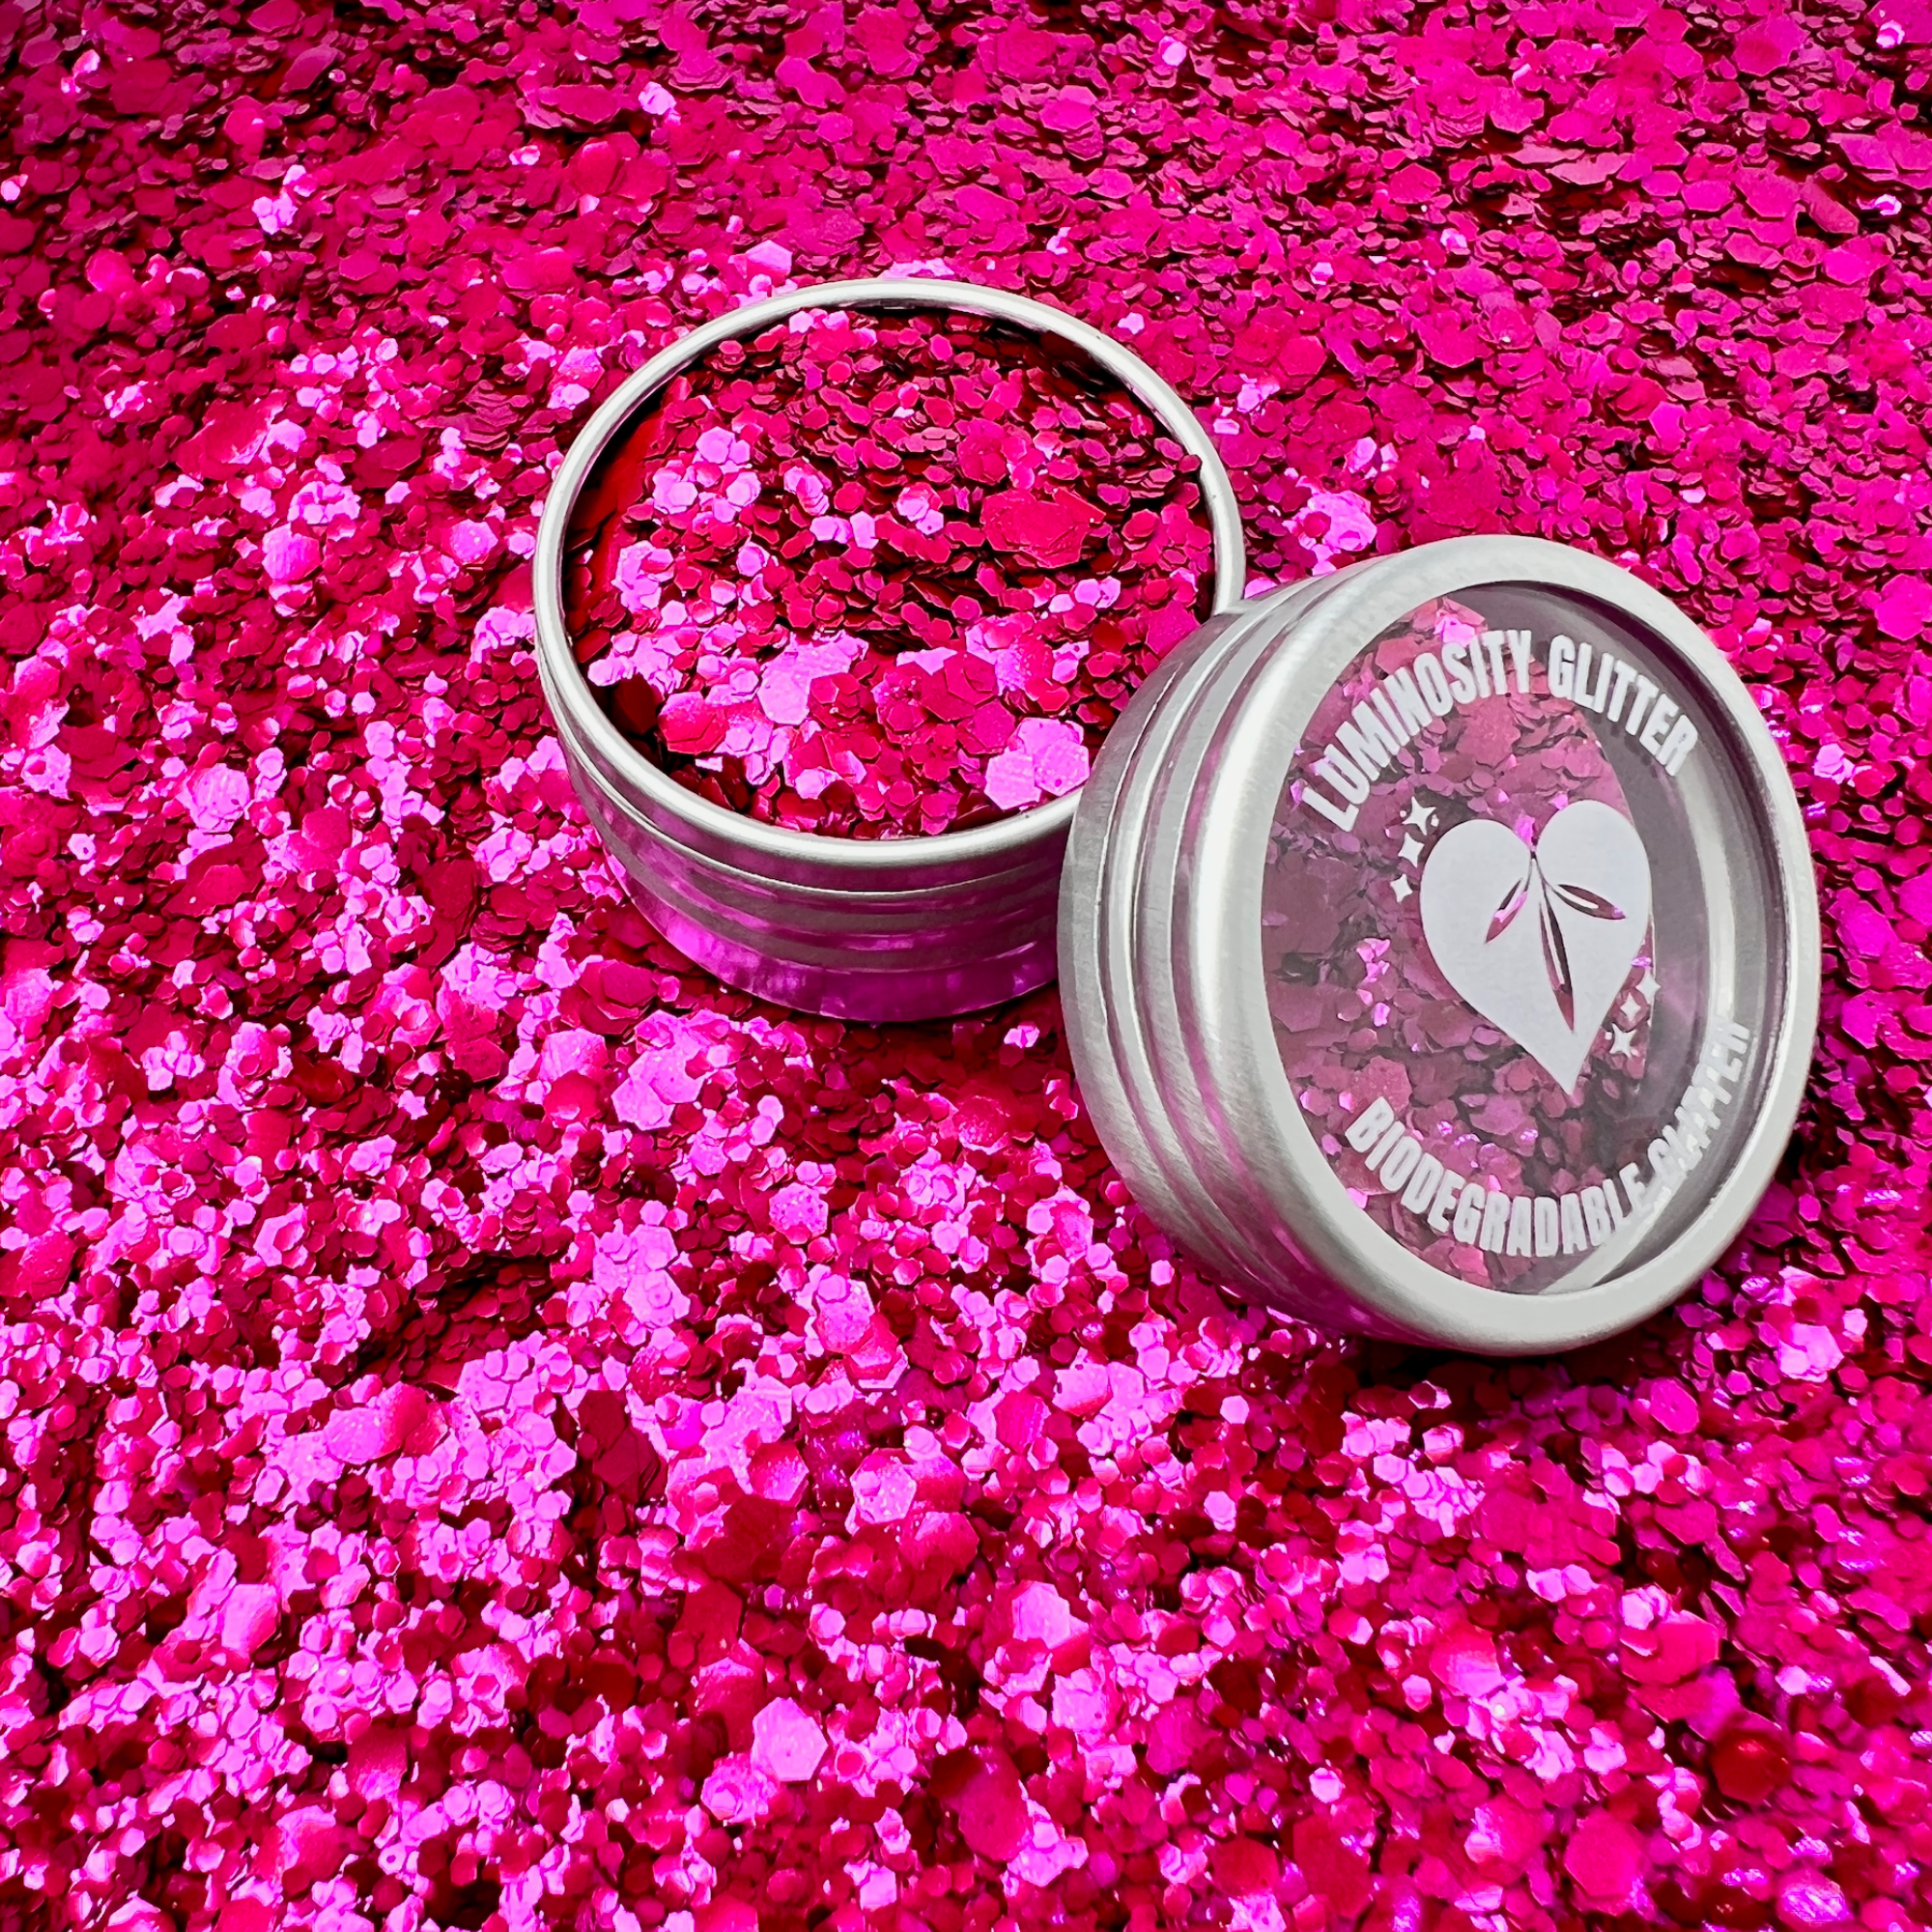 Magenta biodegradable glitter named Stormy Rose by Luminosity Glitter who are based in London.